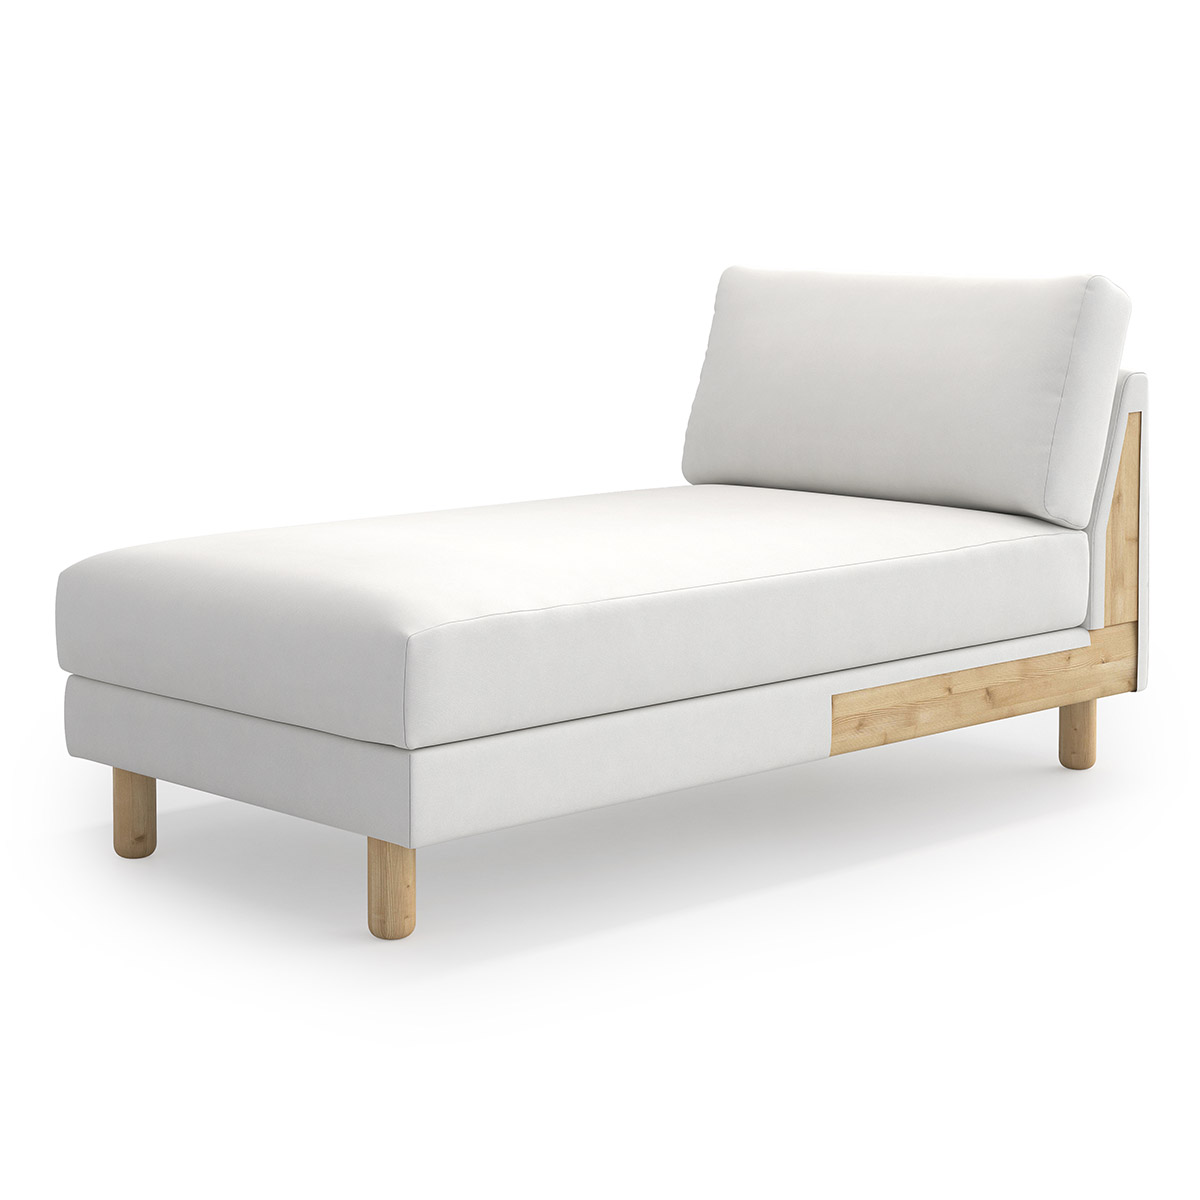 Blozend Deskundige Oppositie Norsborg Chaise Lounge Section Cover Only - Masters of Covers